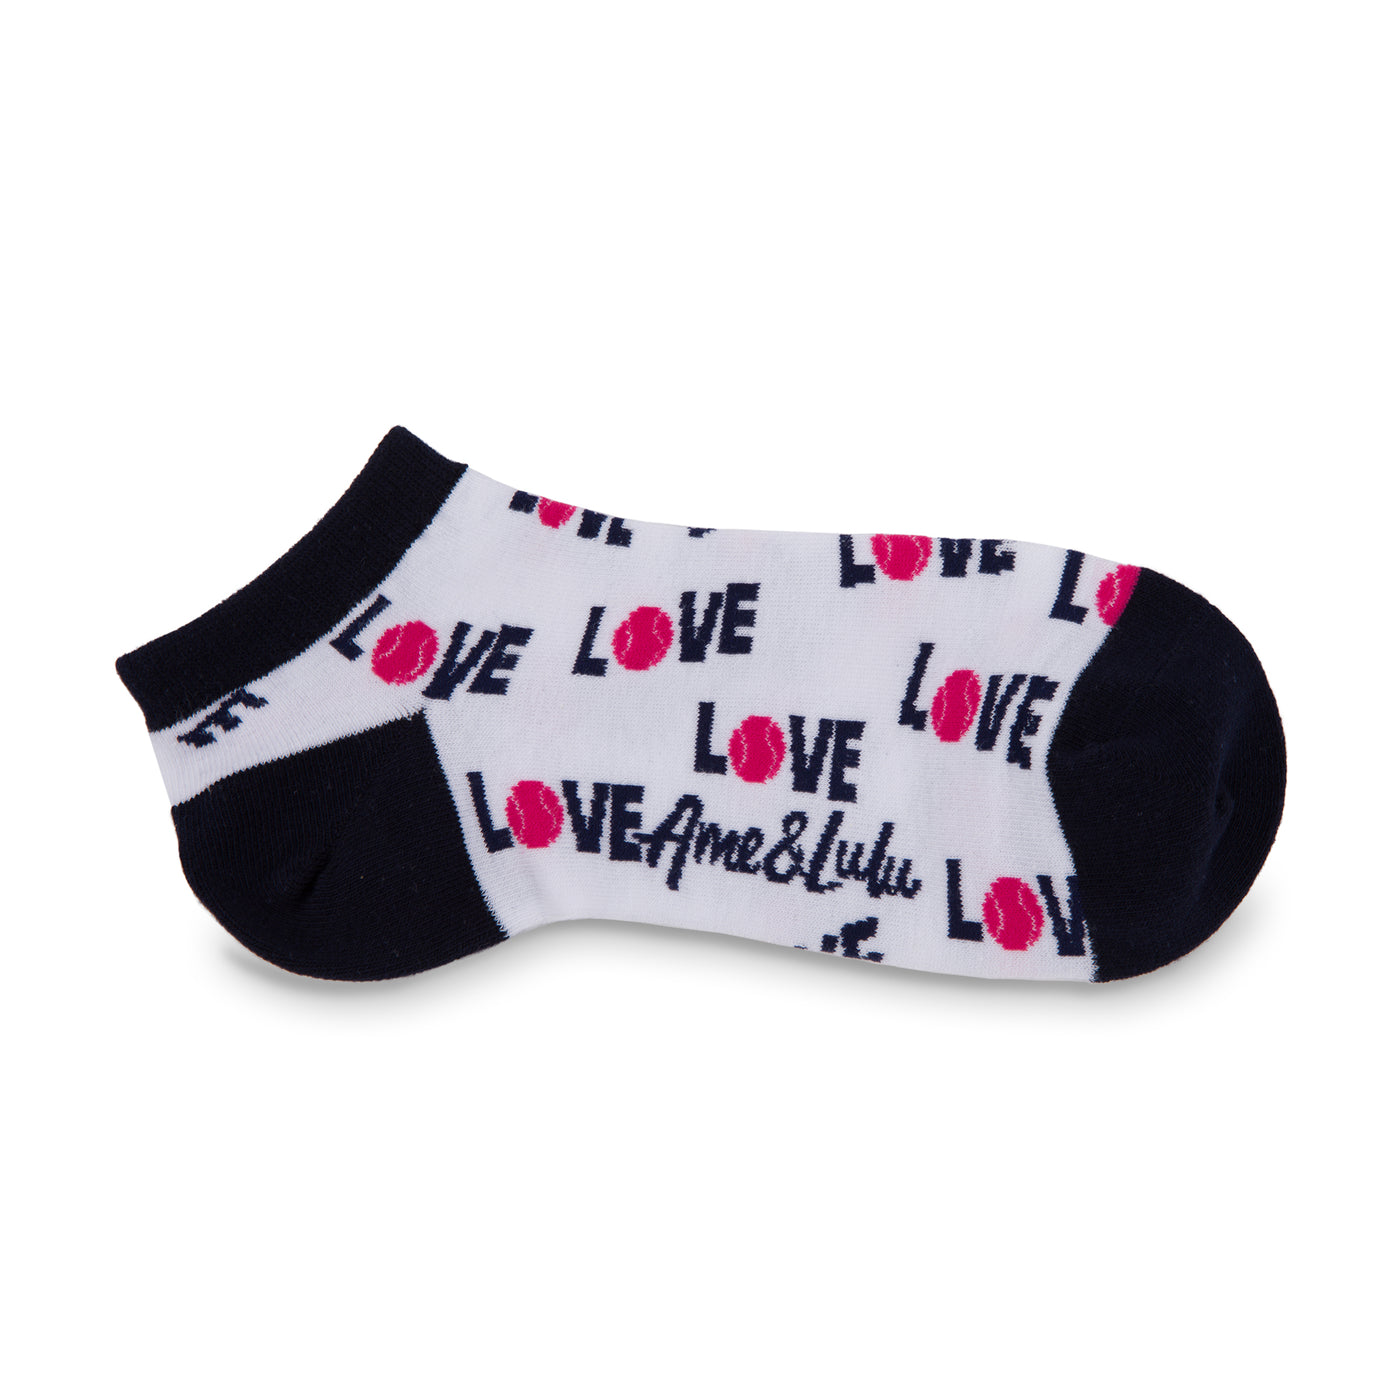 white sock with navy heels and toes. The word love in navy with a pink tennis ball for the letter o are printed around the socks